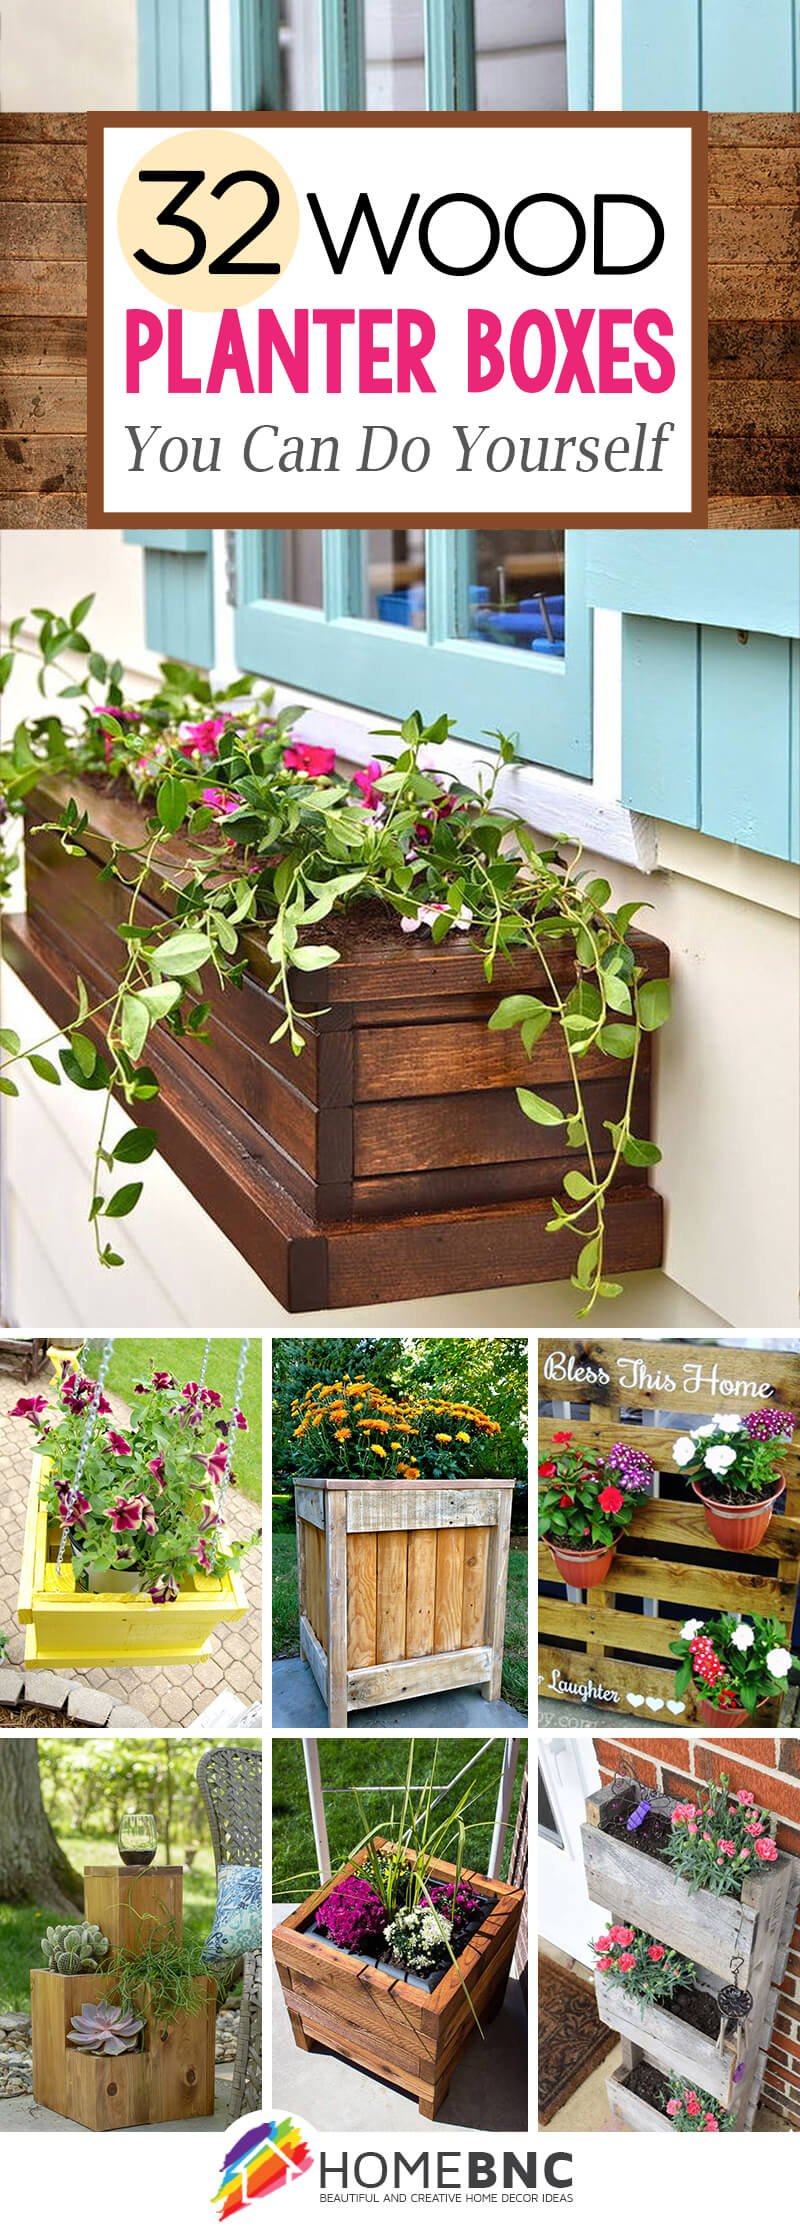 Diy Pallet And Wood Planter Box Ideas, Building A Garden Box From Pallets